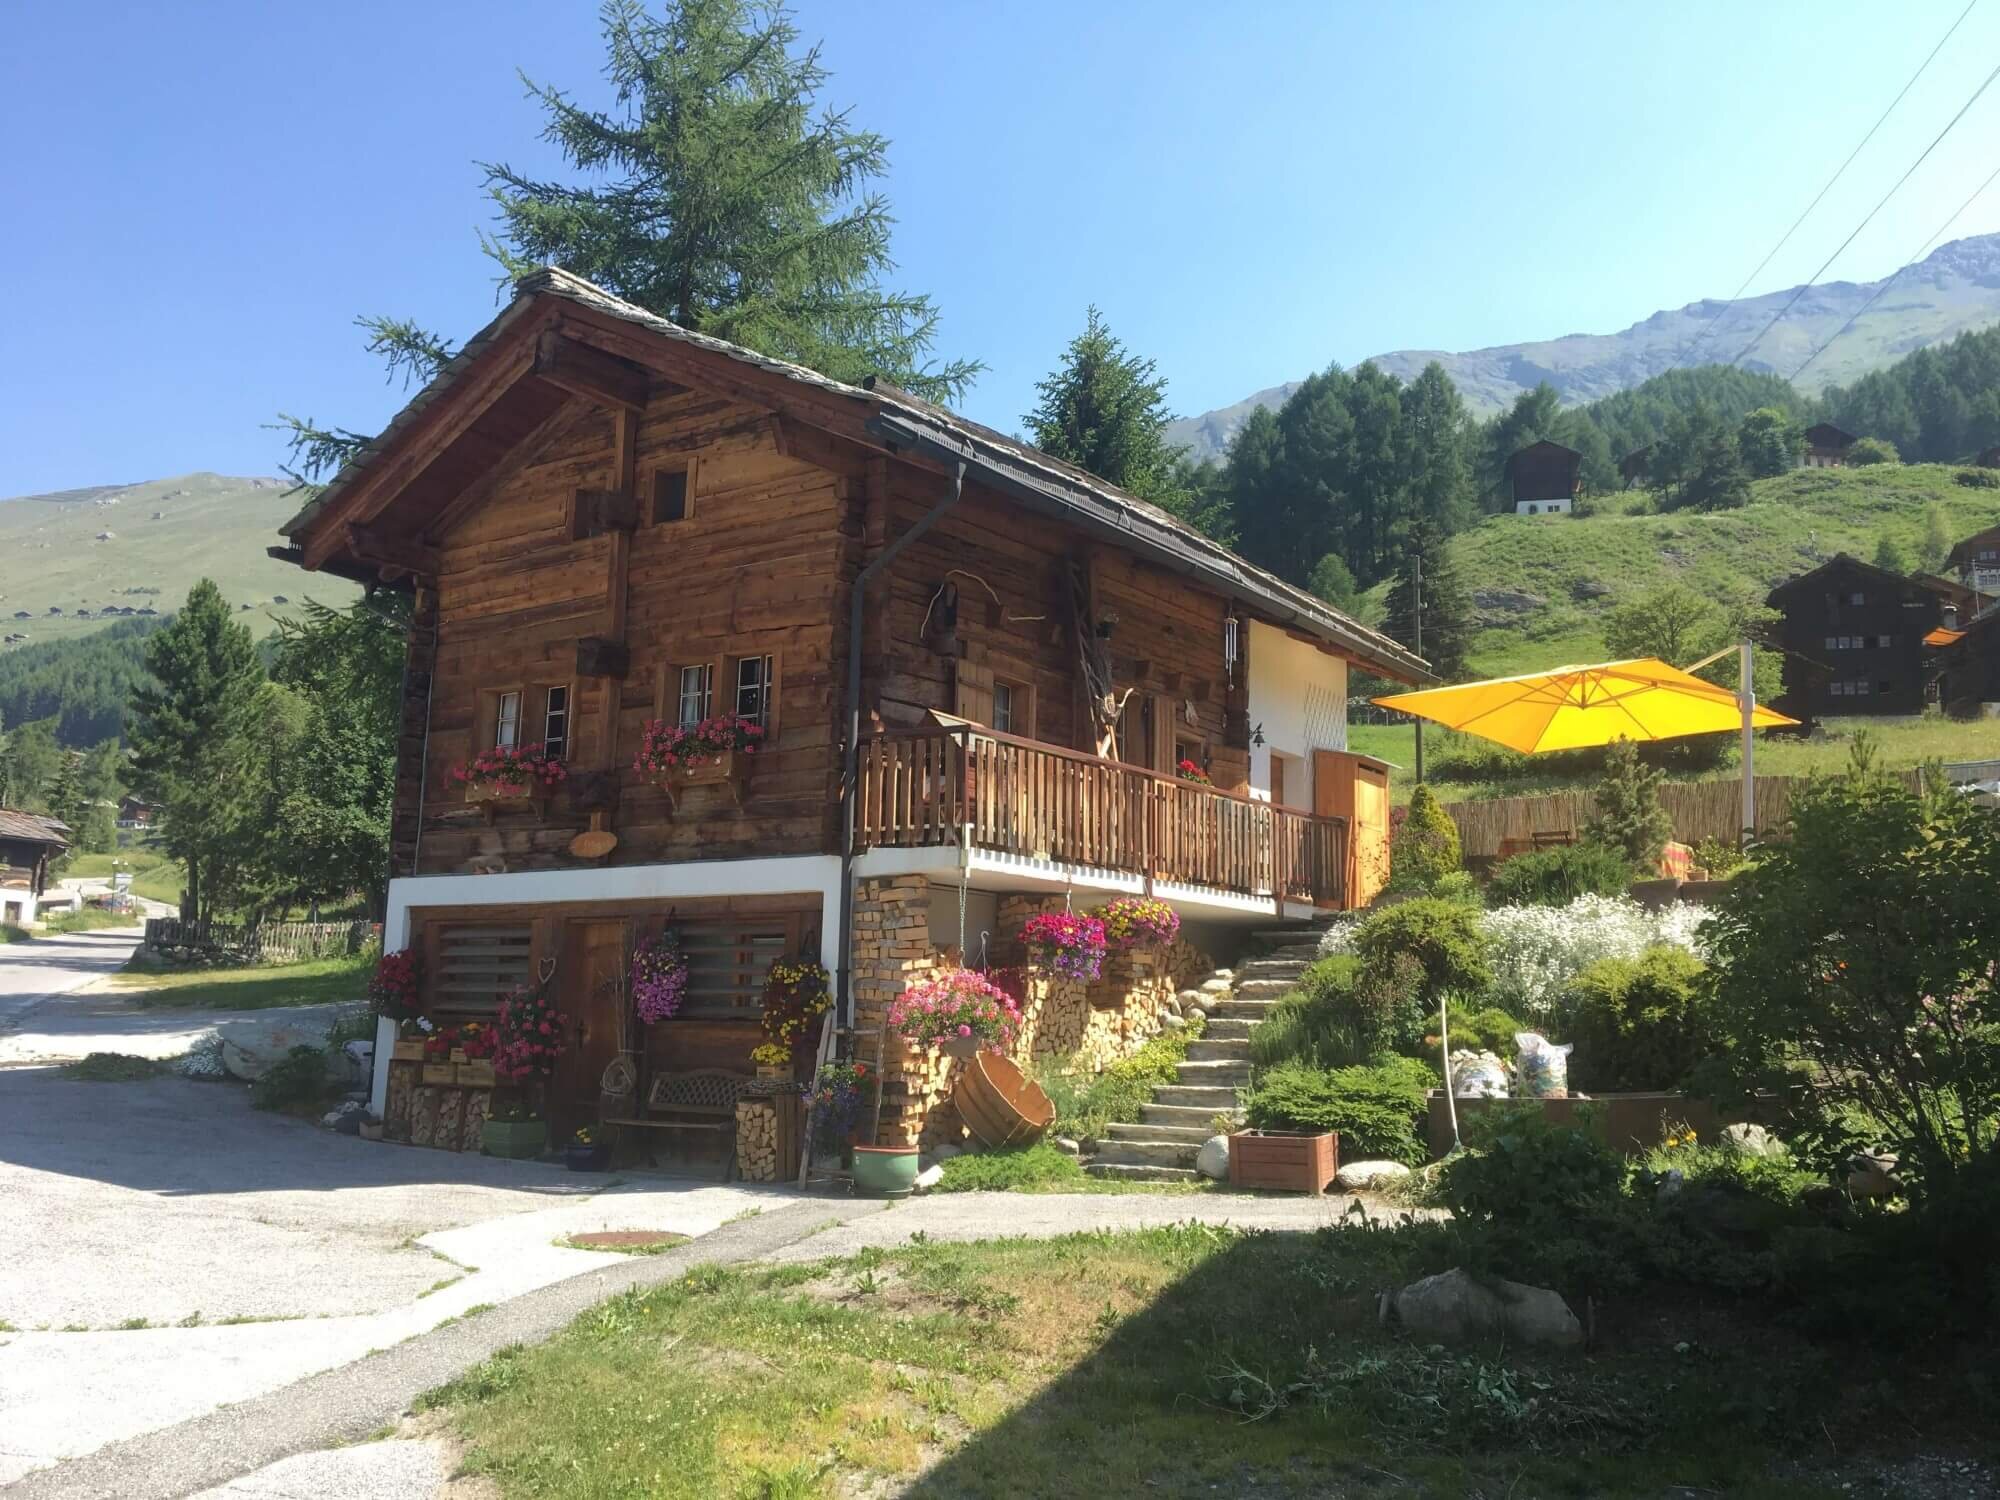 Traditional alpine houses decorated with flowerboxes in La Sage